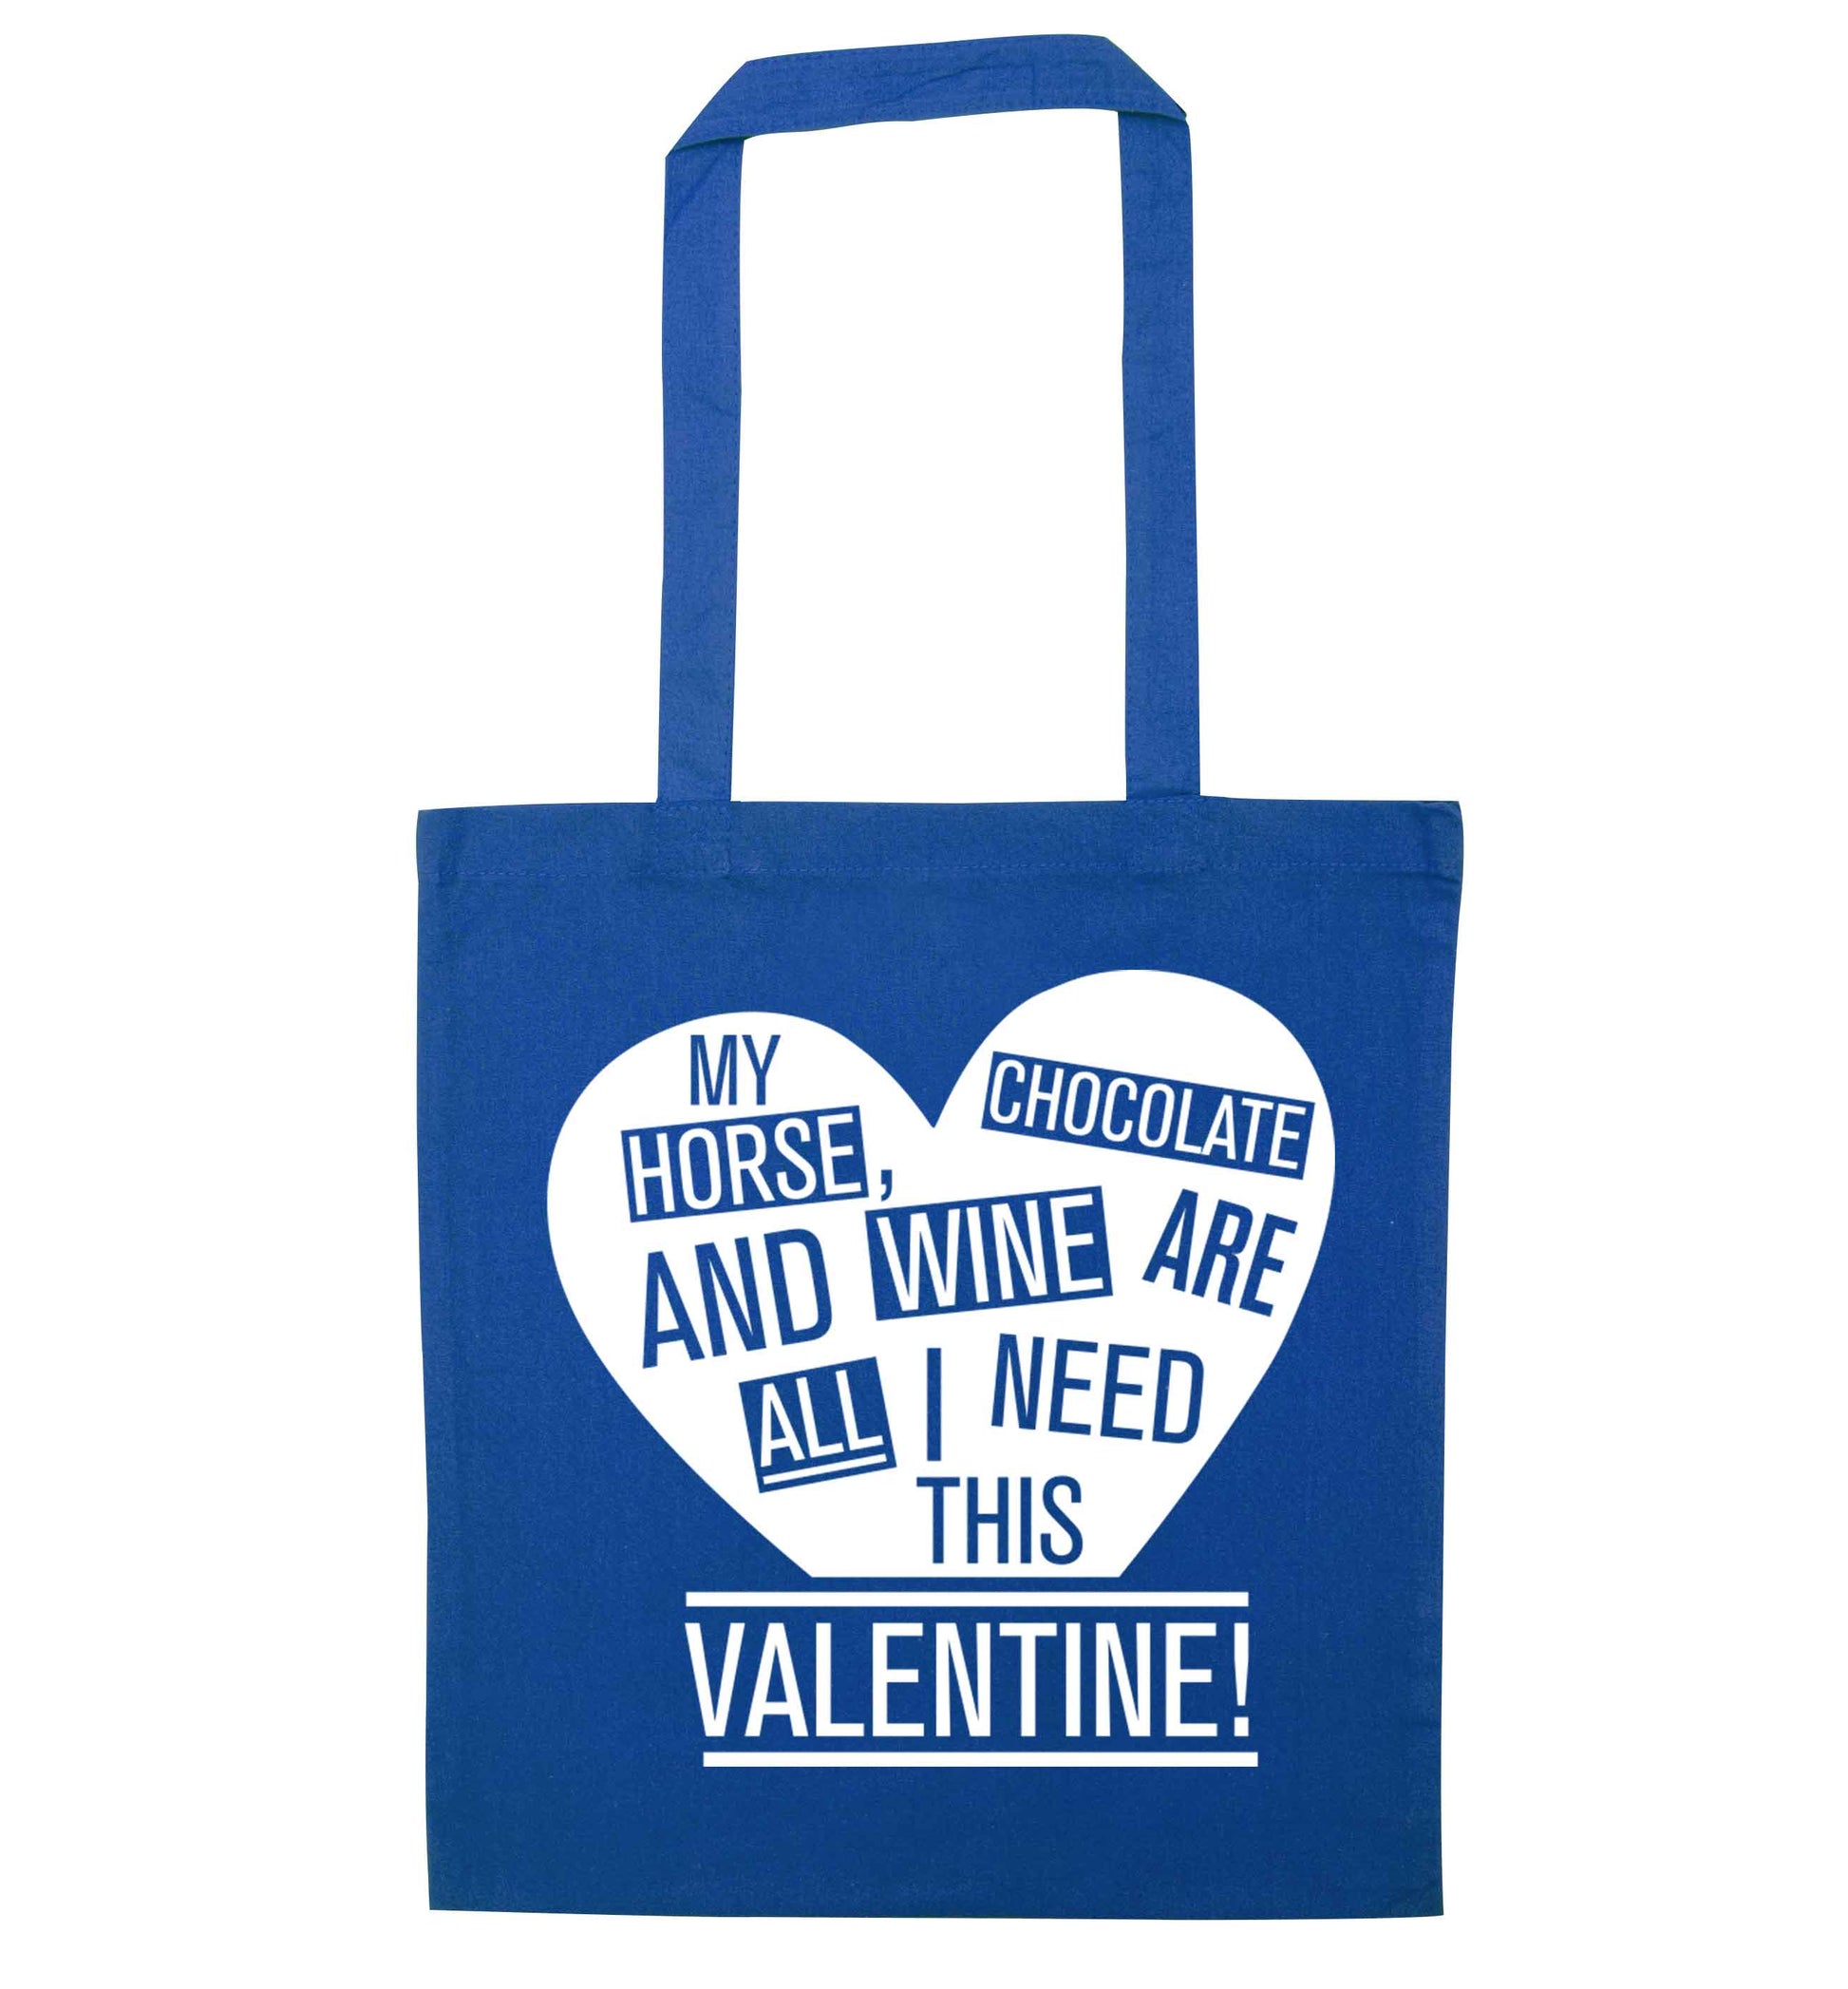 My horse chocolate and wine are all I need this valentine blue tote bag